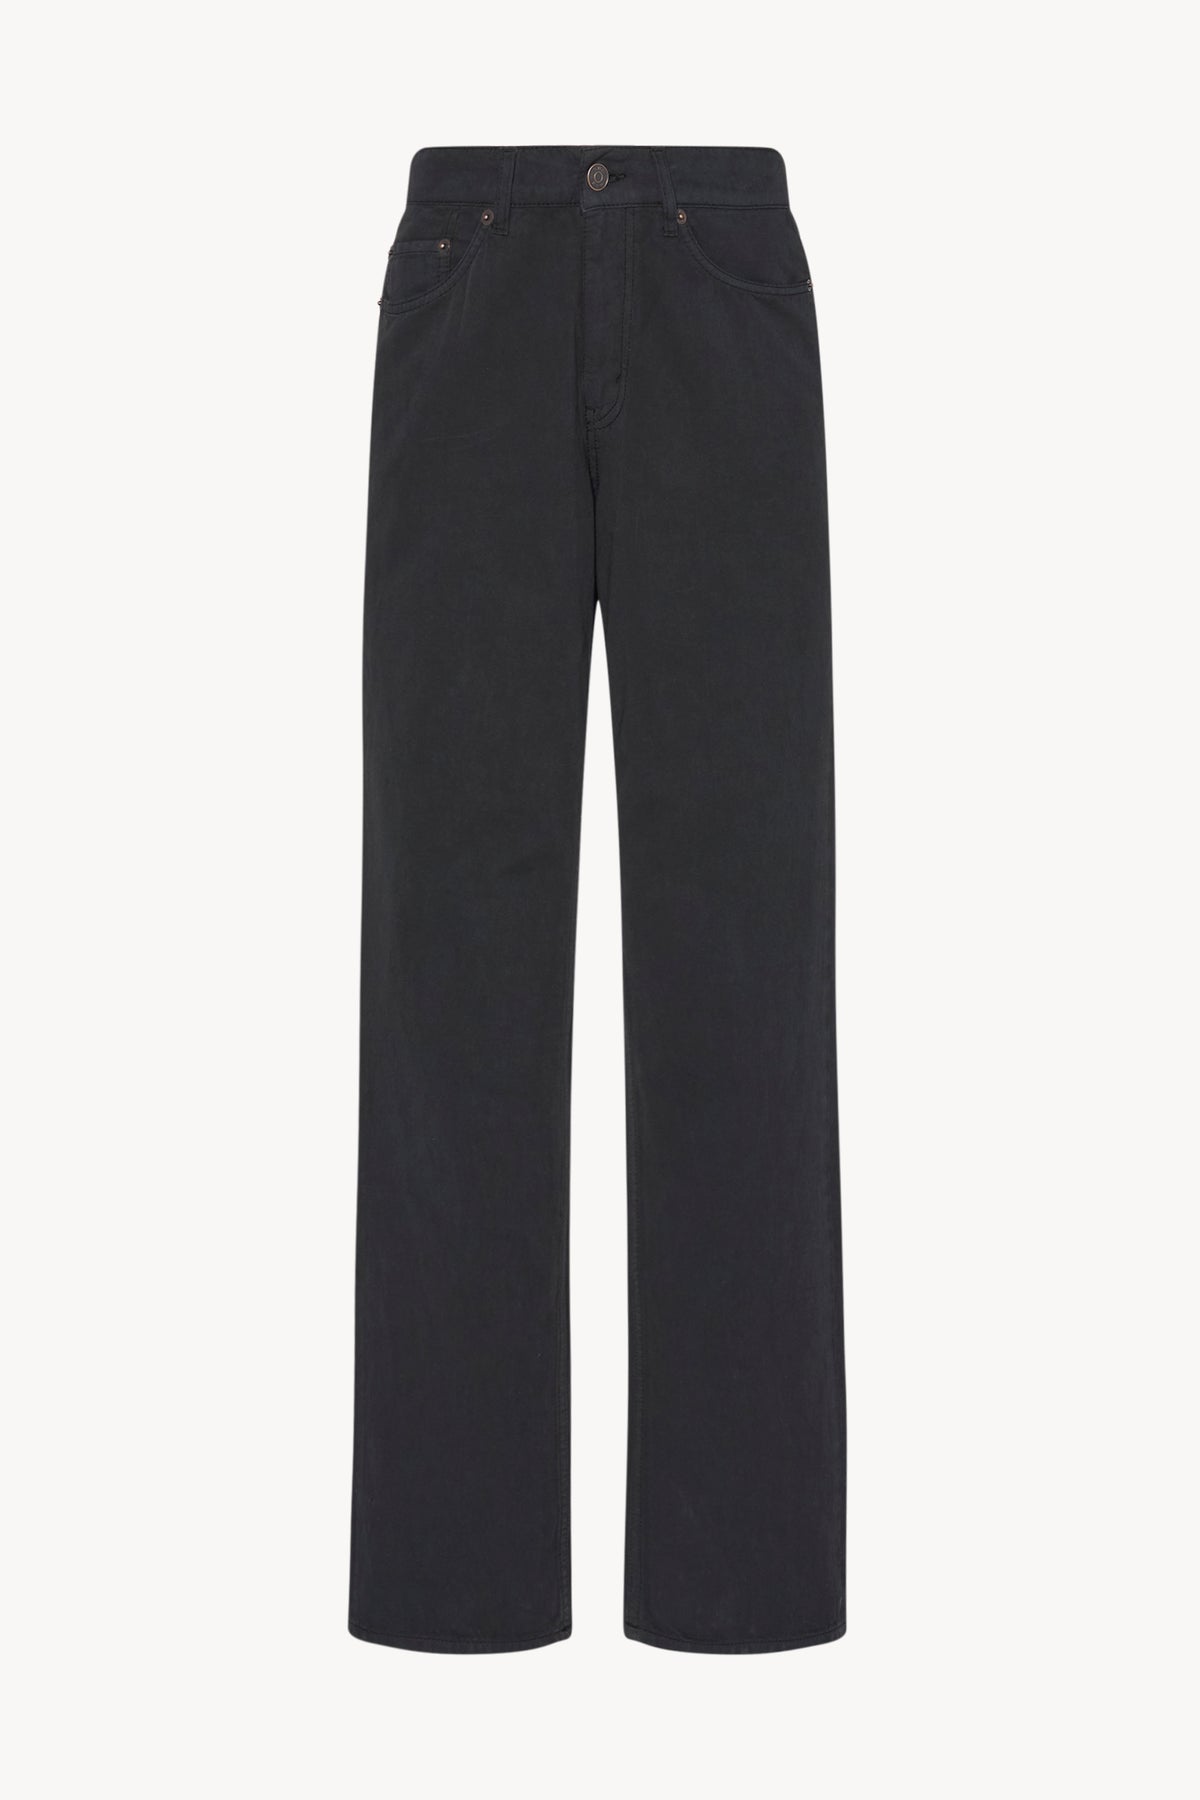 Carlton Pant in Cotton and Linen